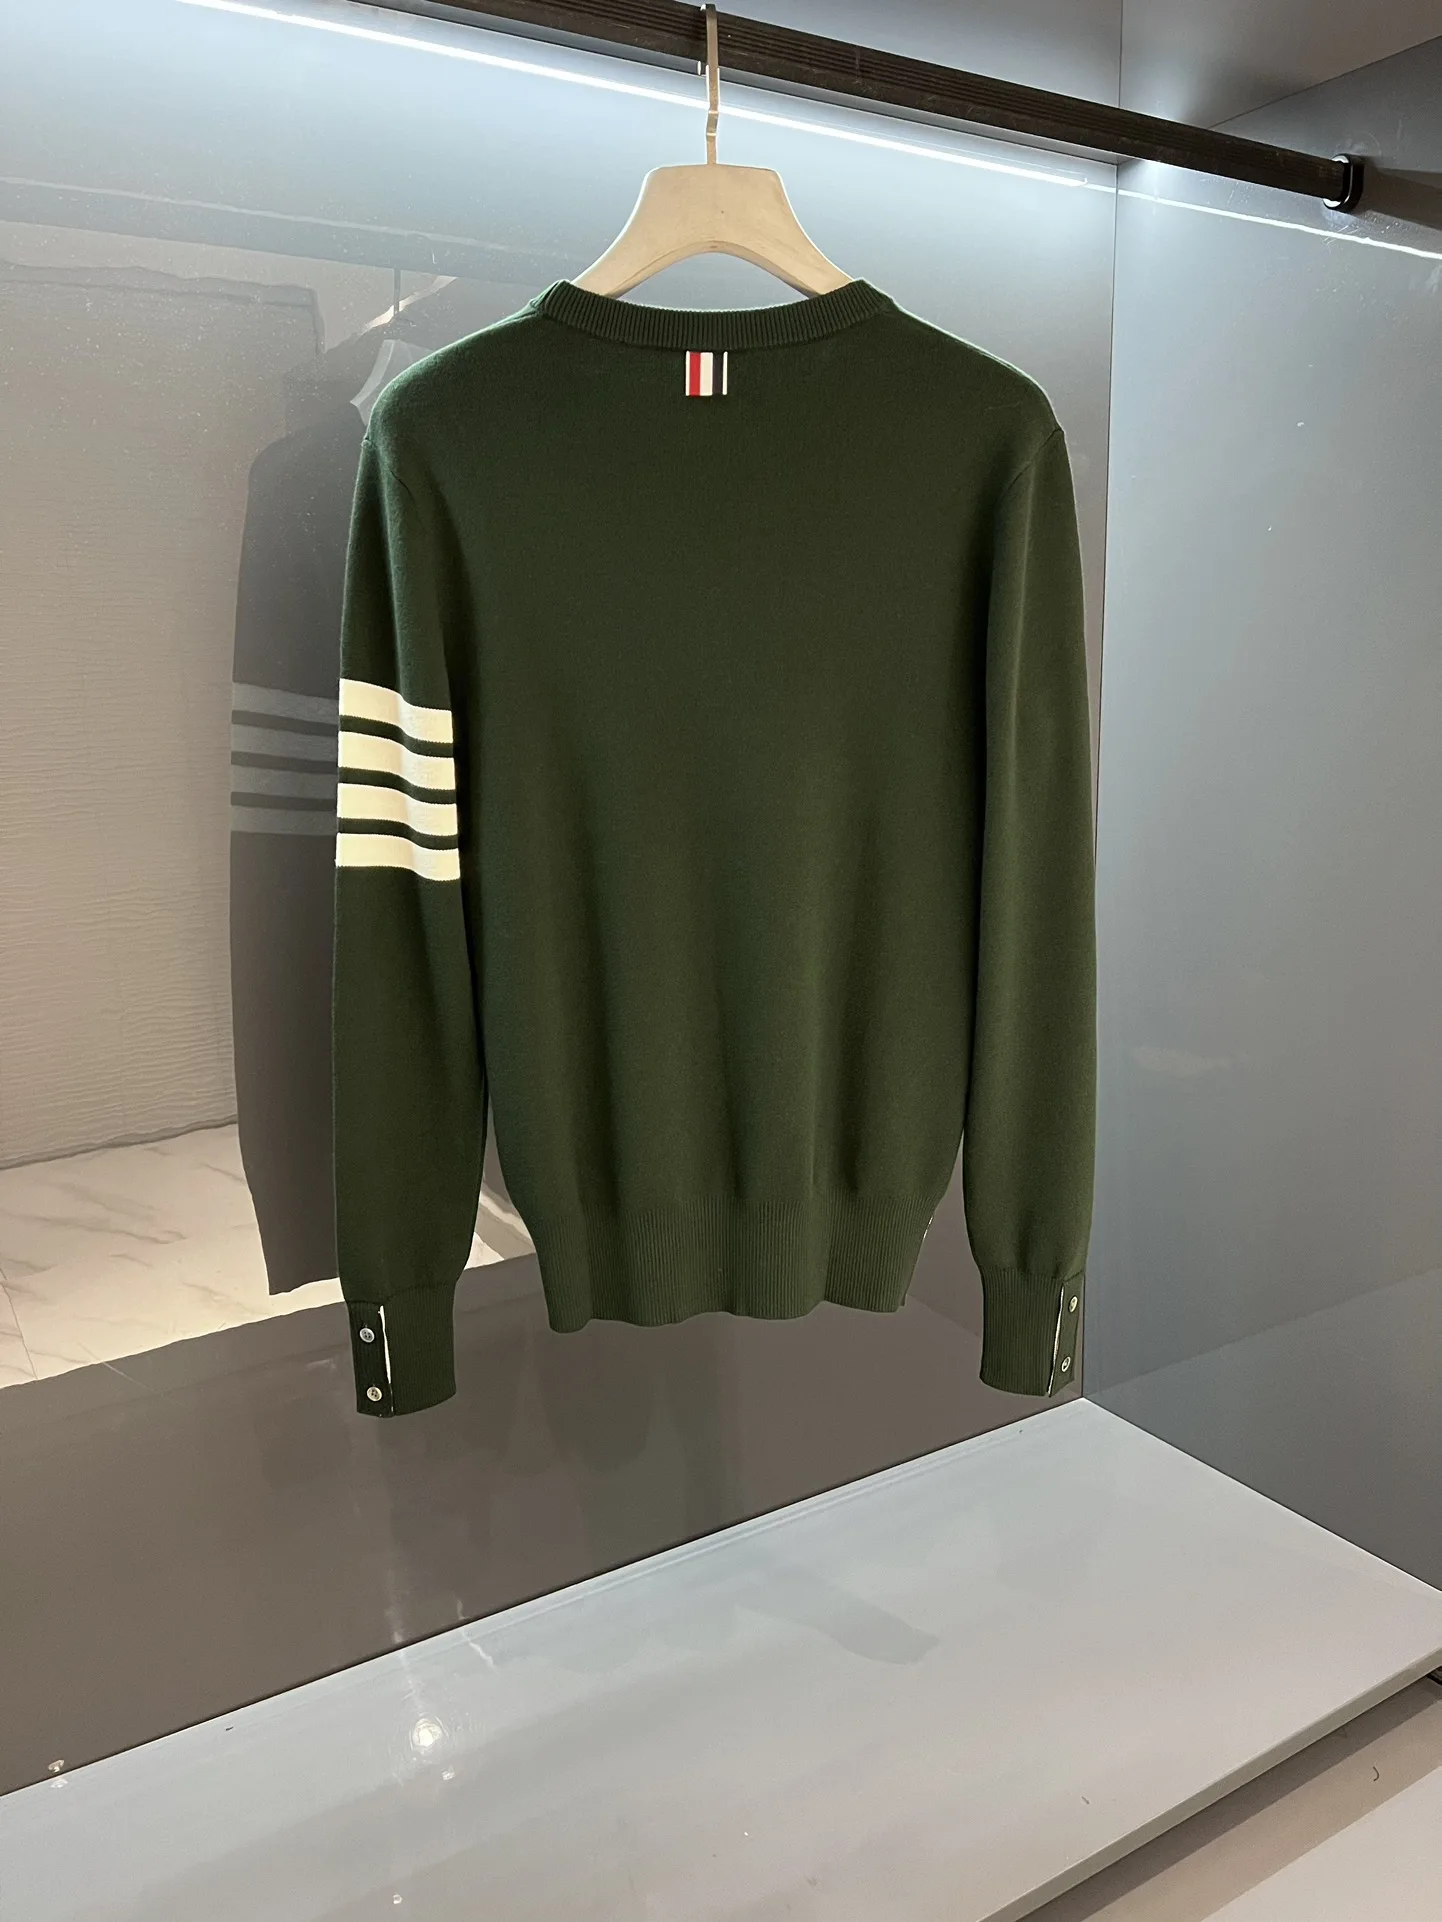 New TB Sweater Green Fashion Brand Classic Tops High Quality 4-Bar White Striped Crew Neck Pullover Coat